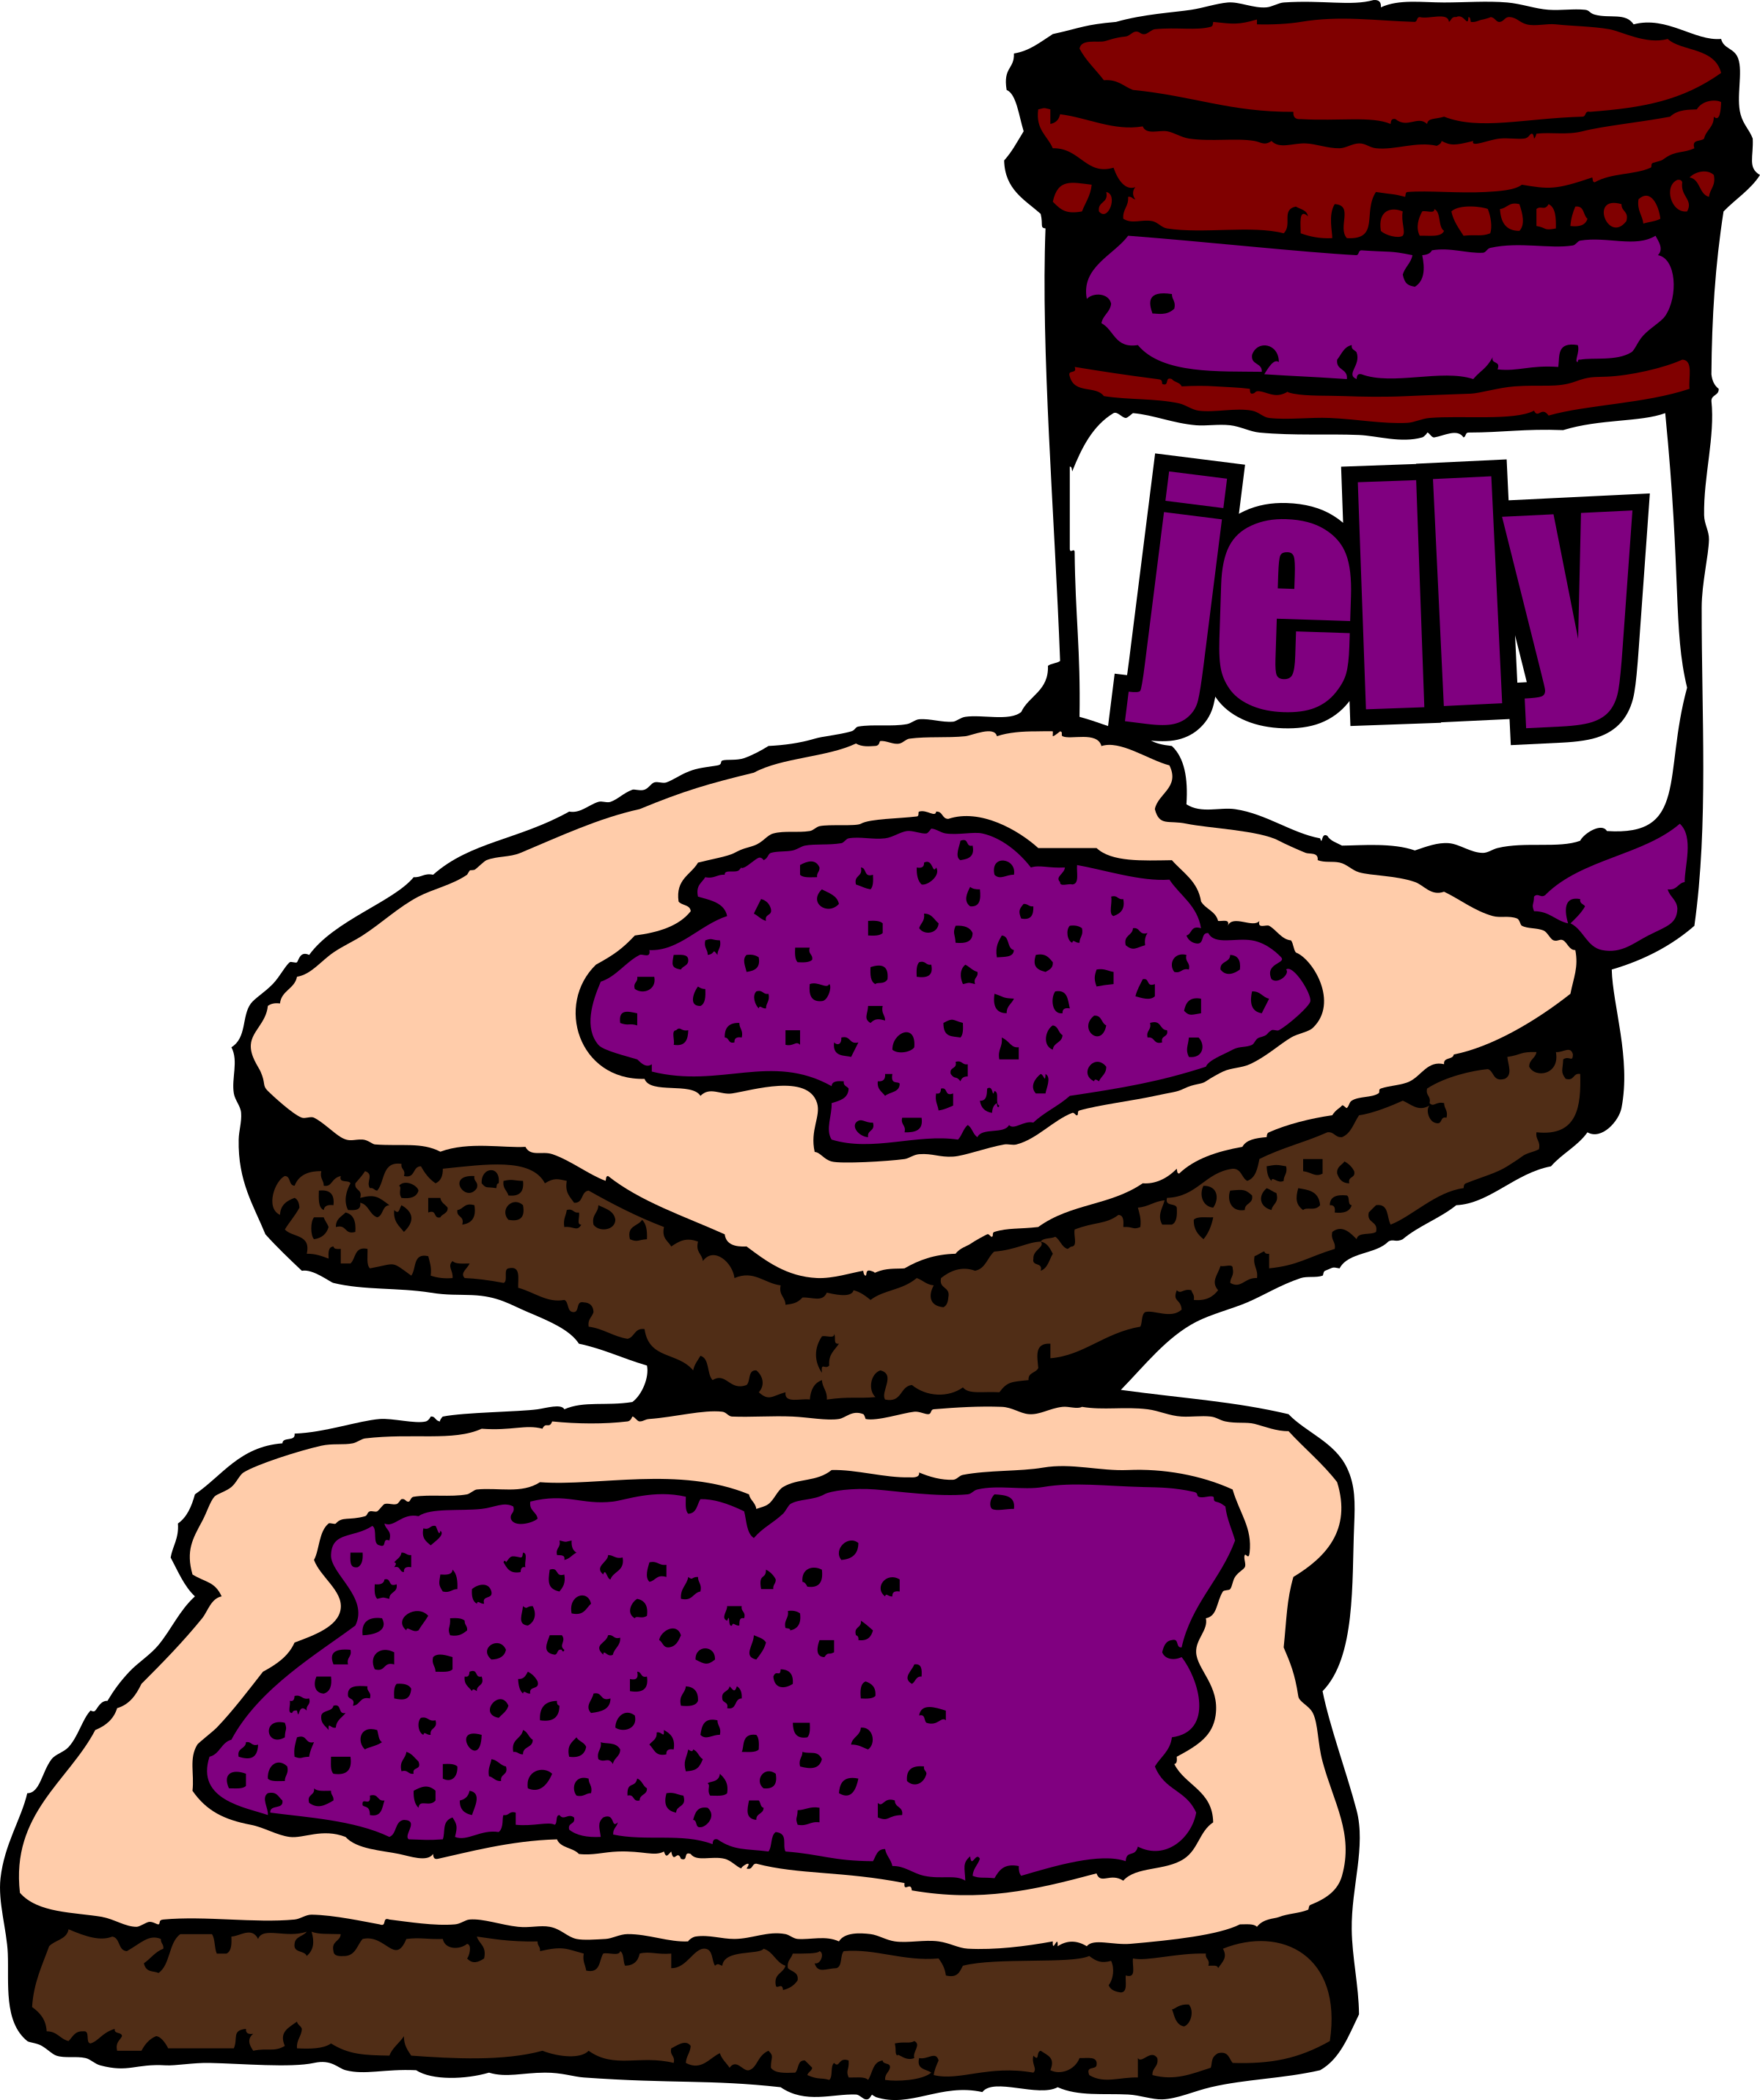 Colorized Peanut Butter And Jelly Sandwich By Snifty